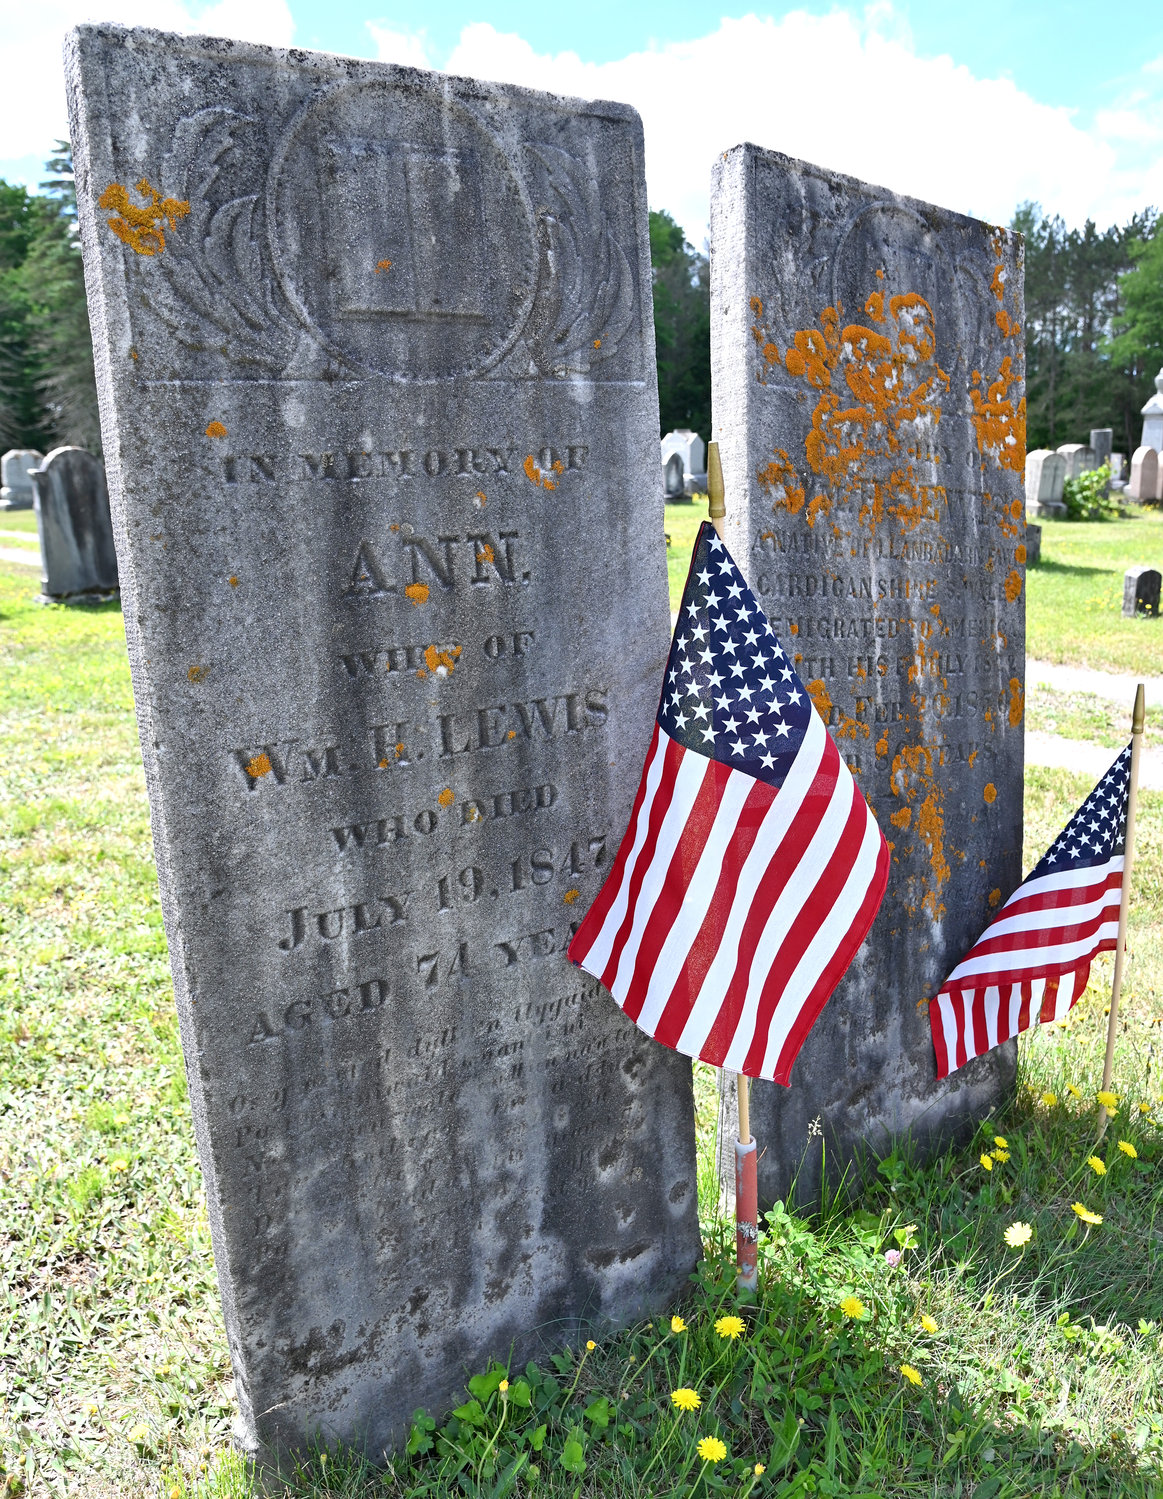 Old headstones share stories of past residents at the Prospect Cemetery.